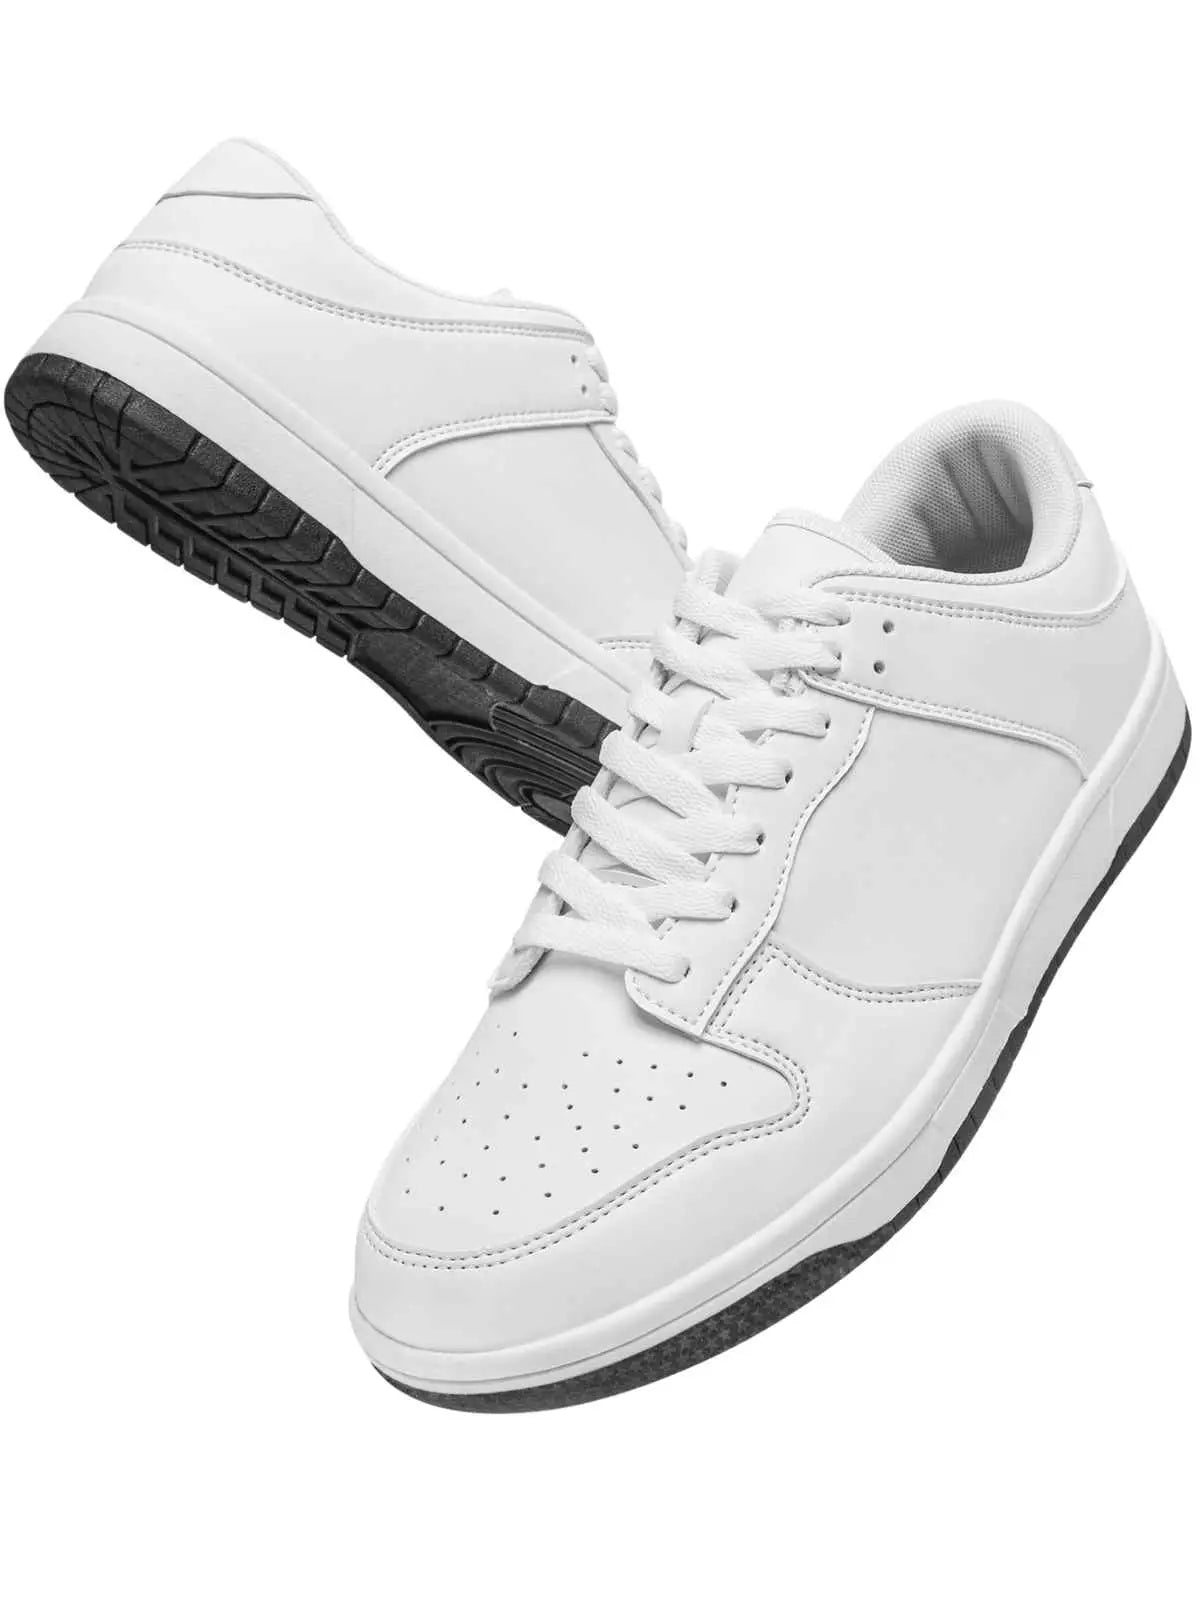 White Shoe Care - Buy White Shoe Care Online at Best Prices In India